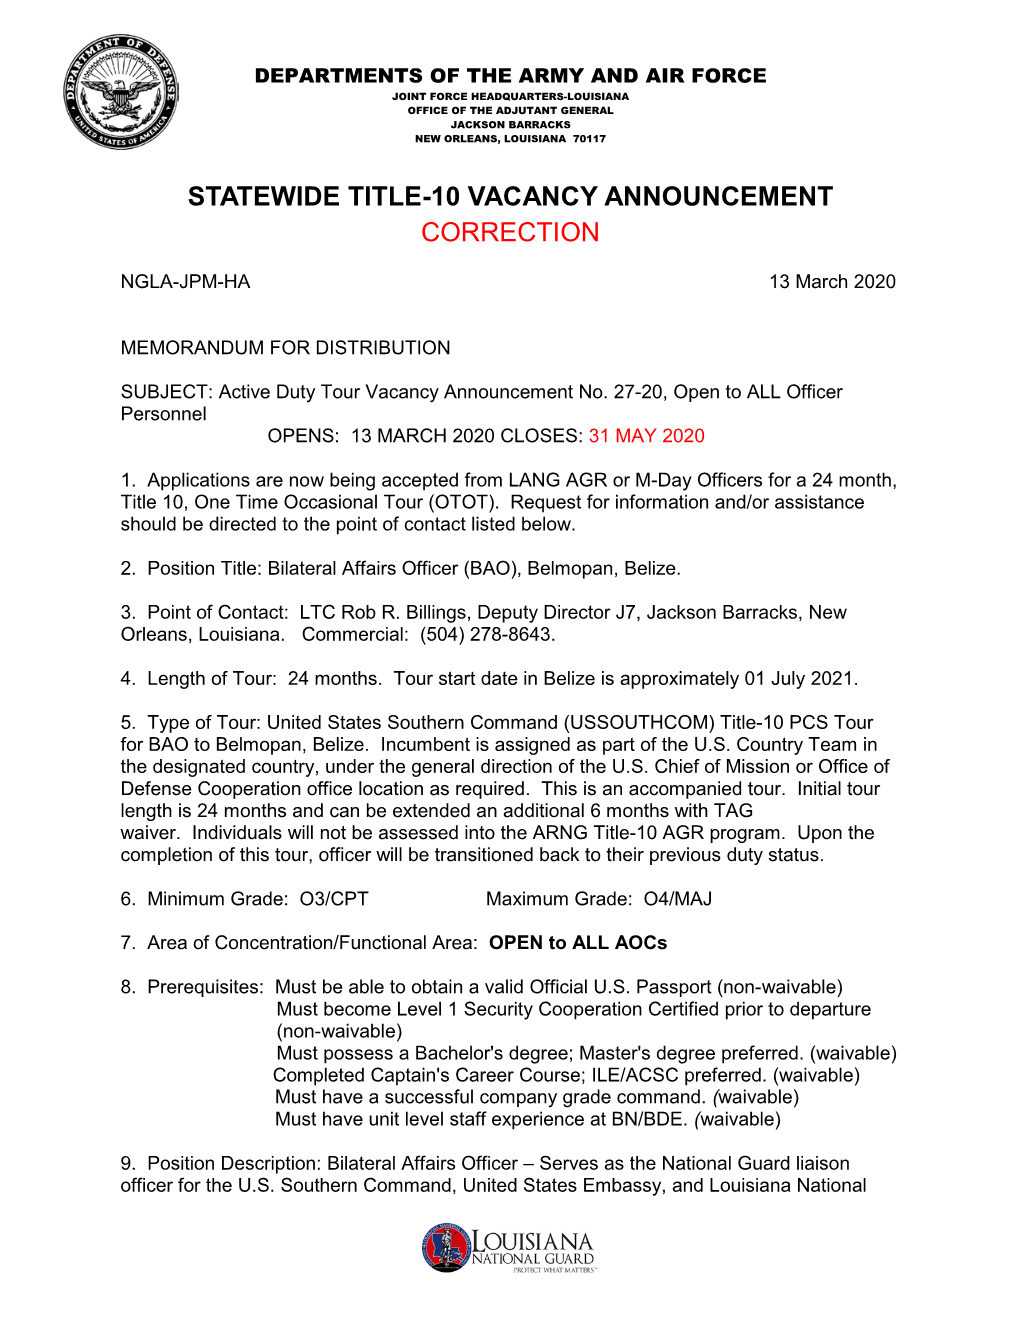 Statewide Title-10 Vacancy Announcement Correction